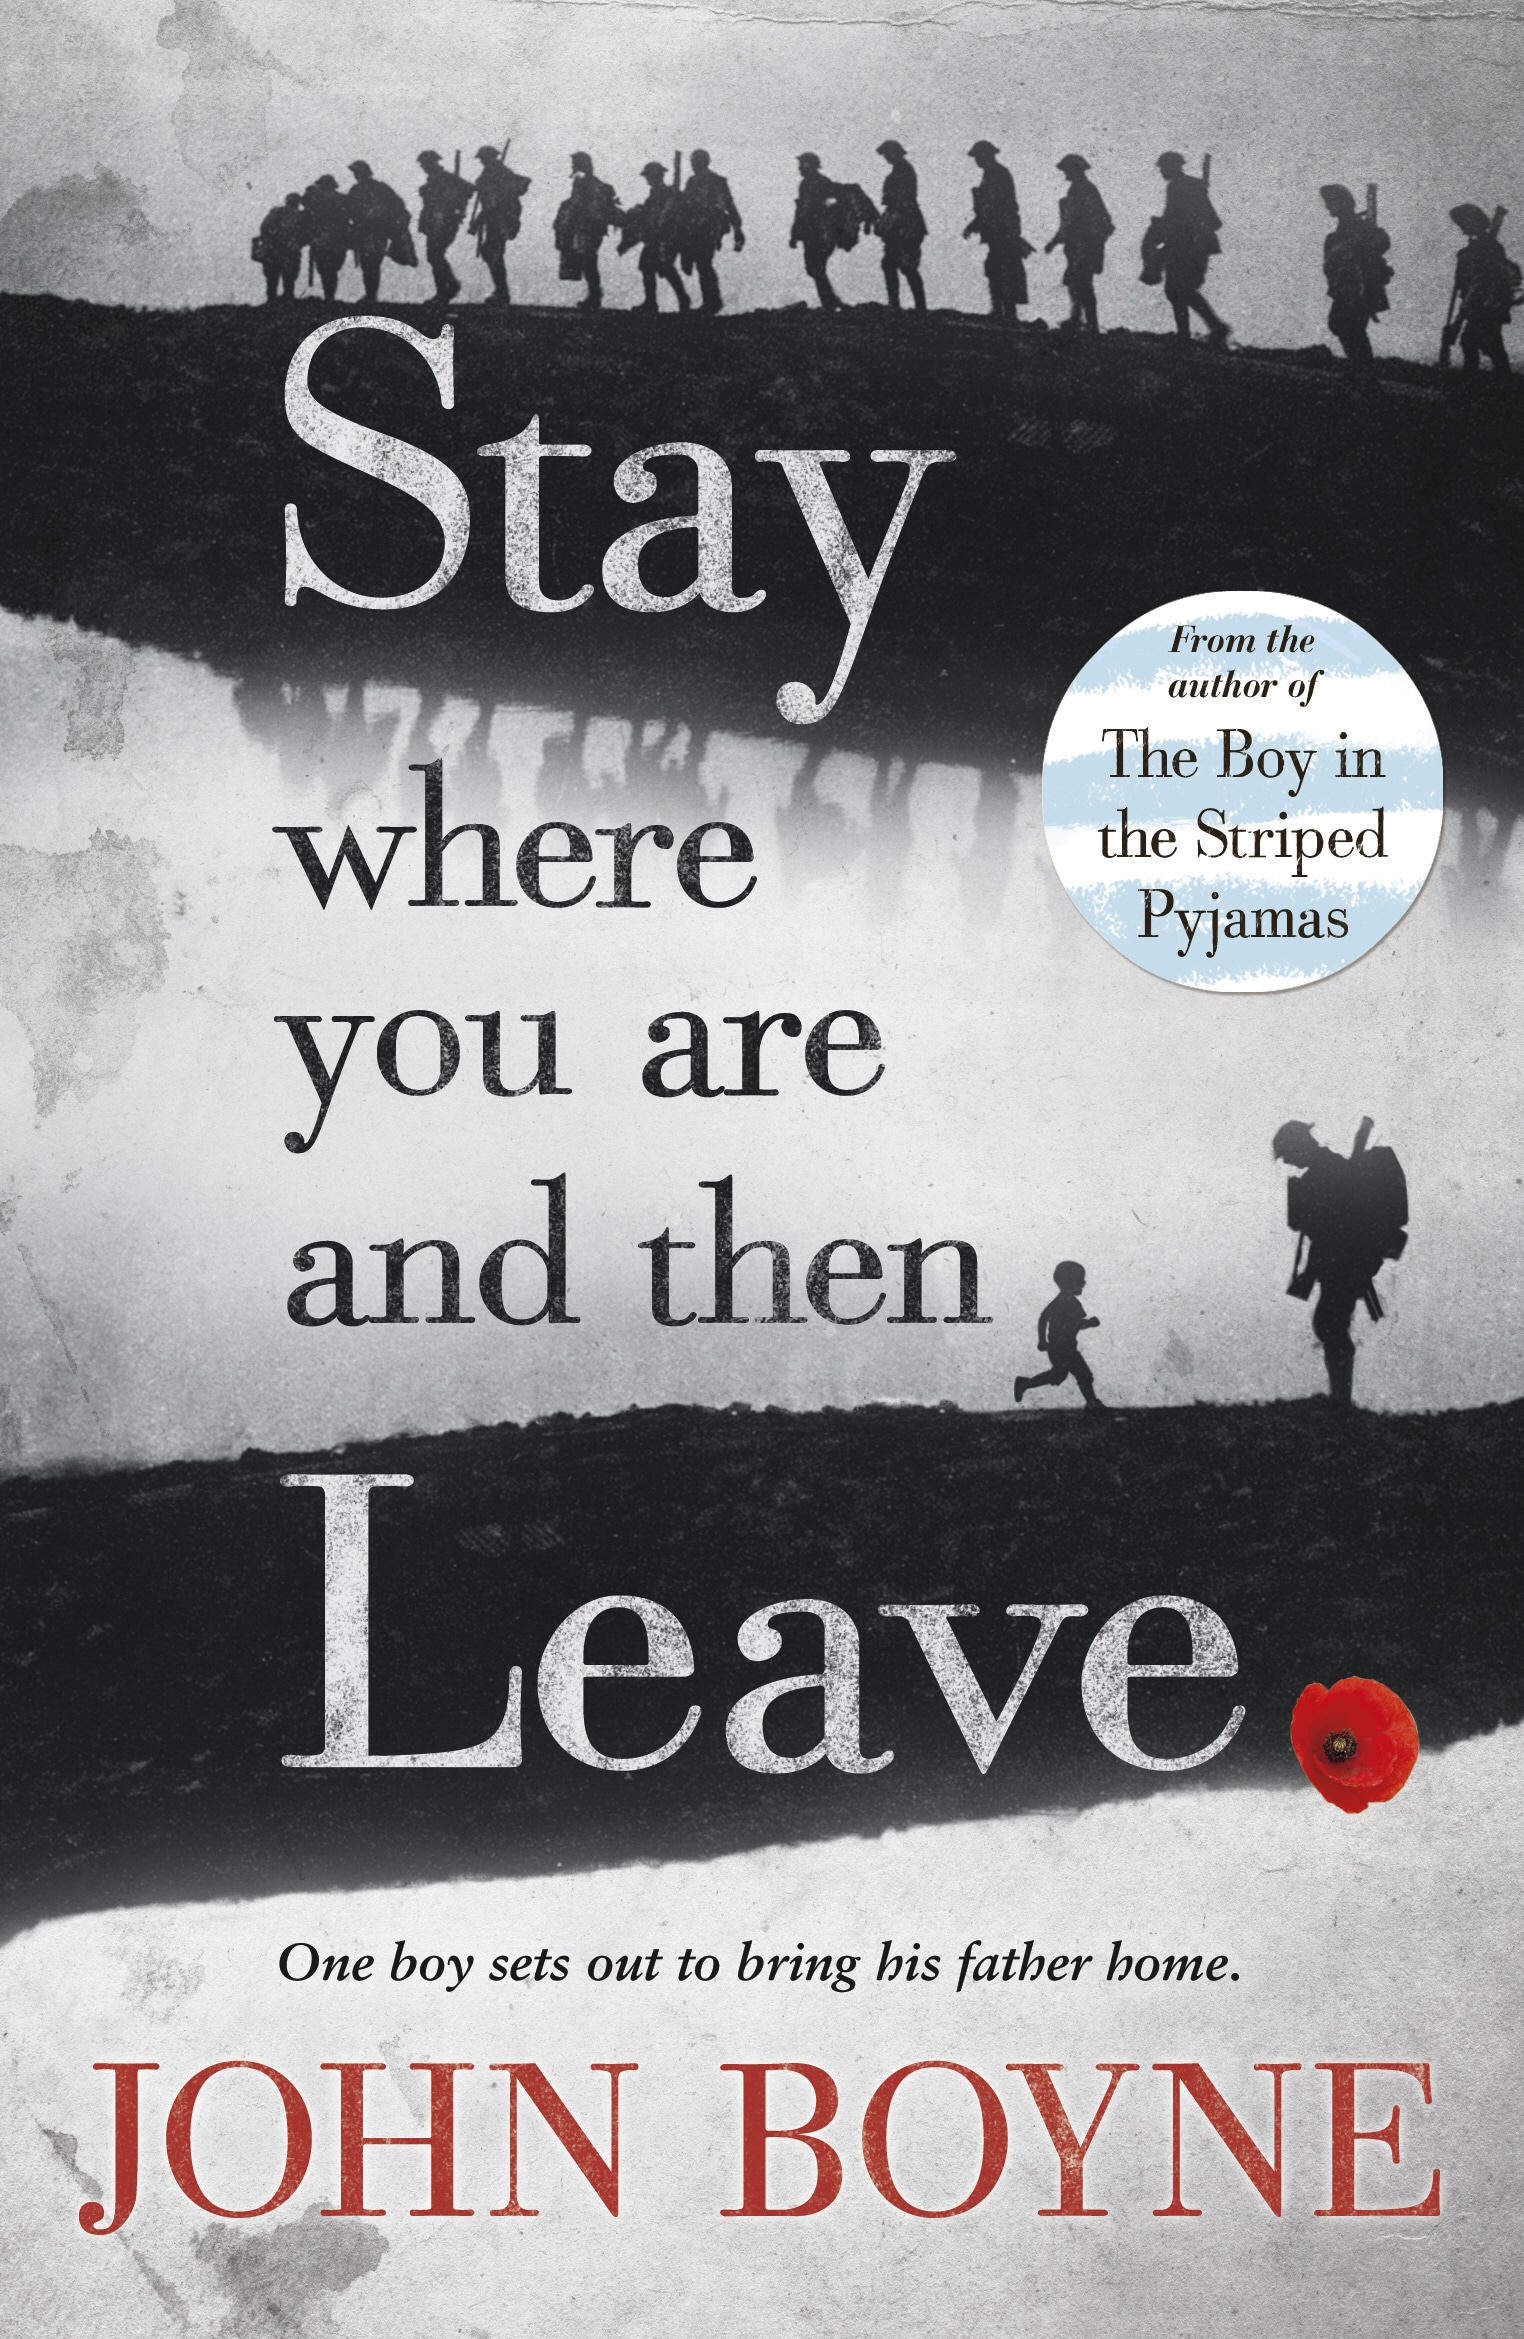 Book “Stay Where You Are And Then Leave” by John Boyne — July 3, 2014